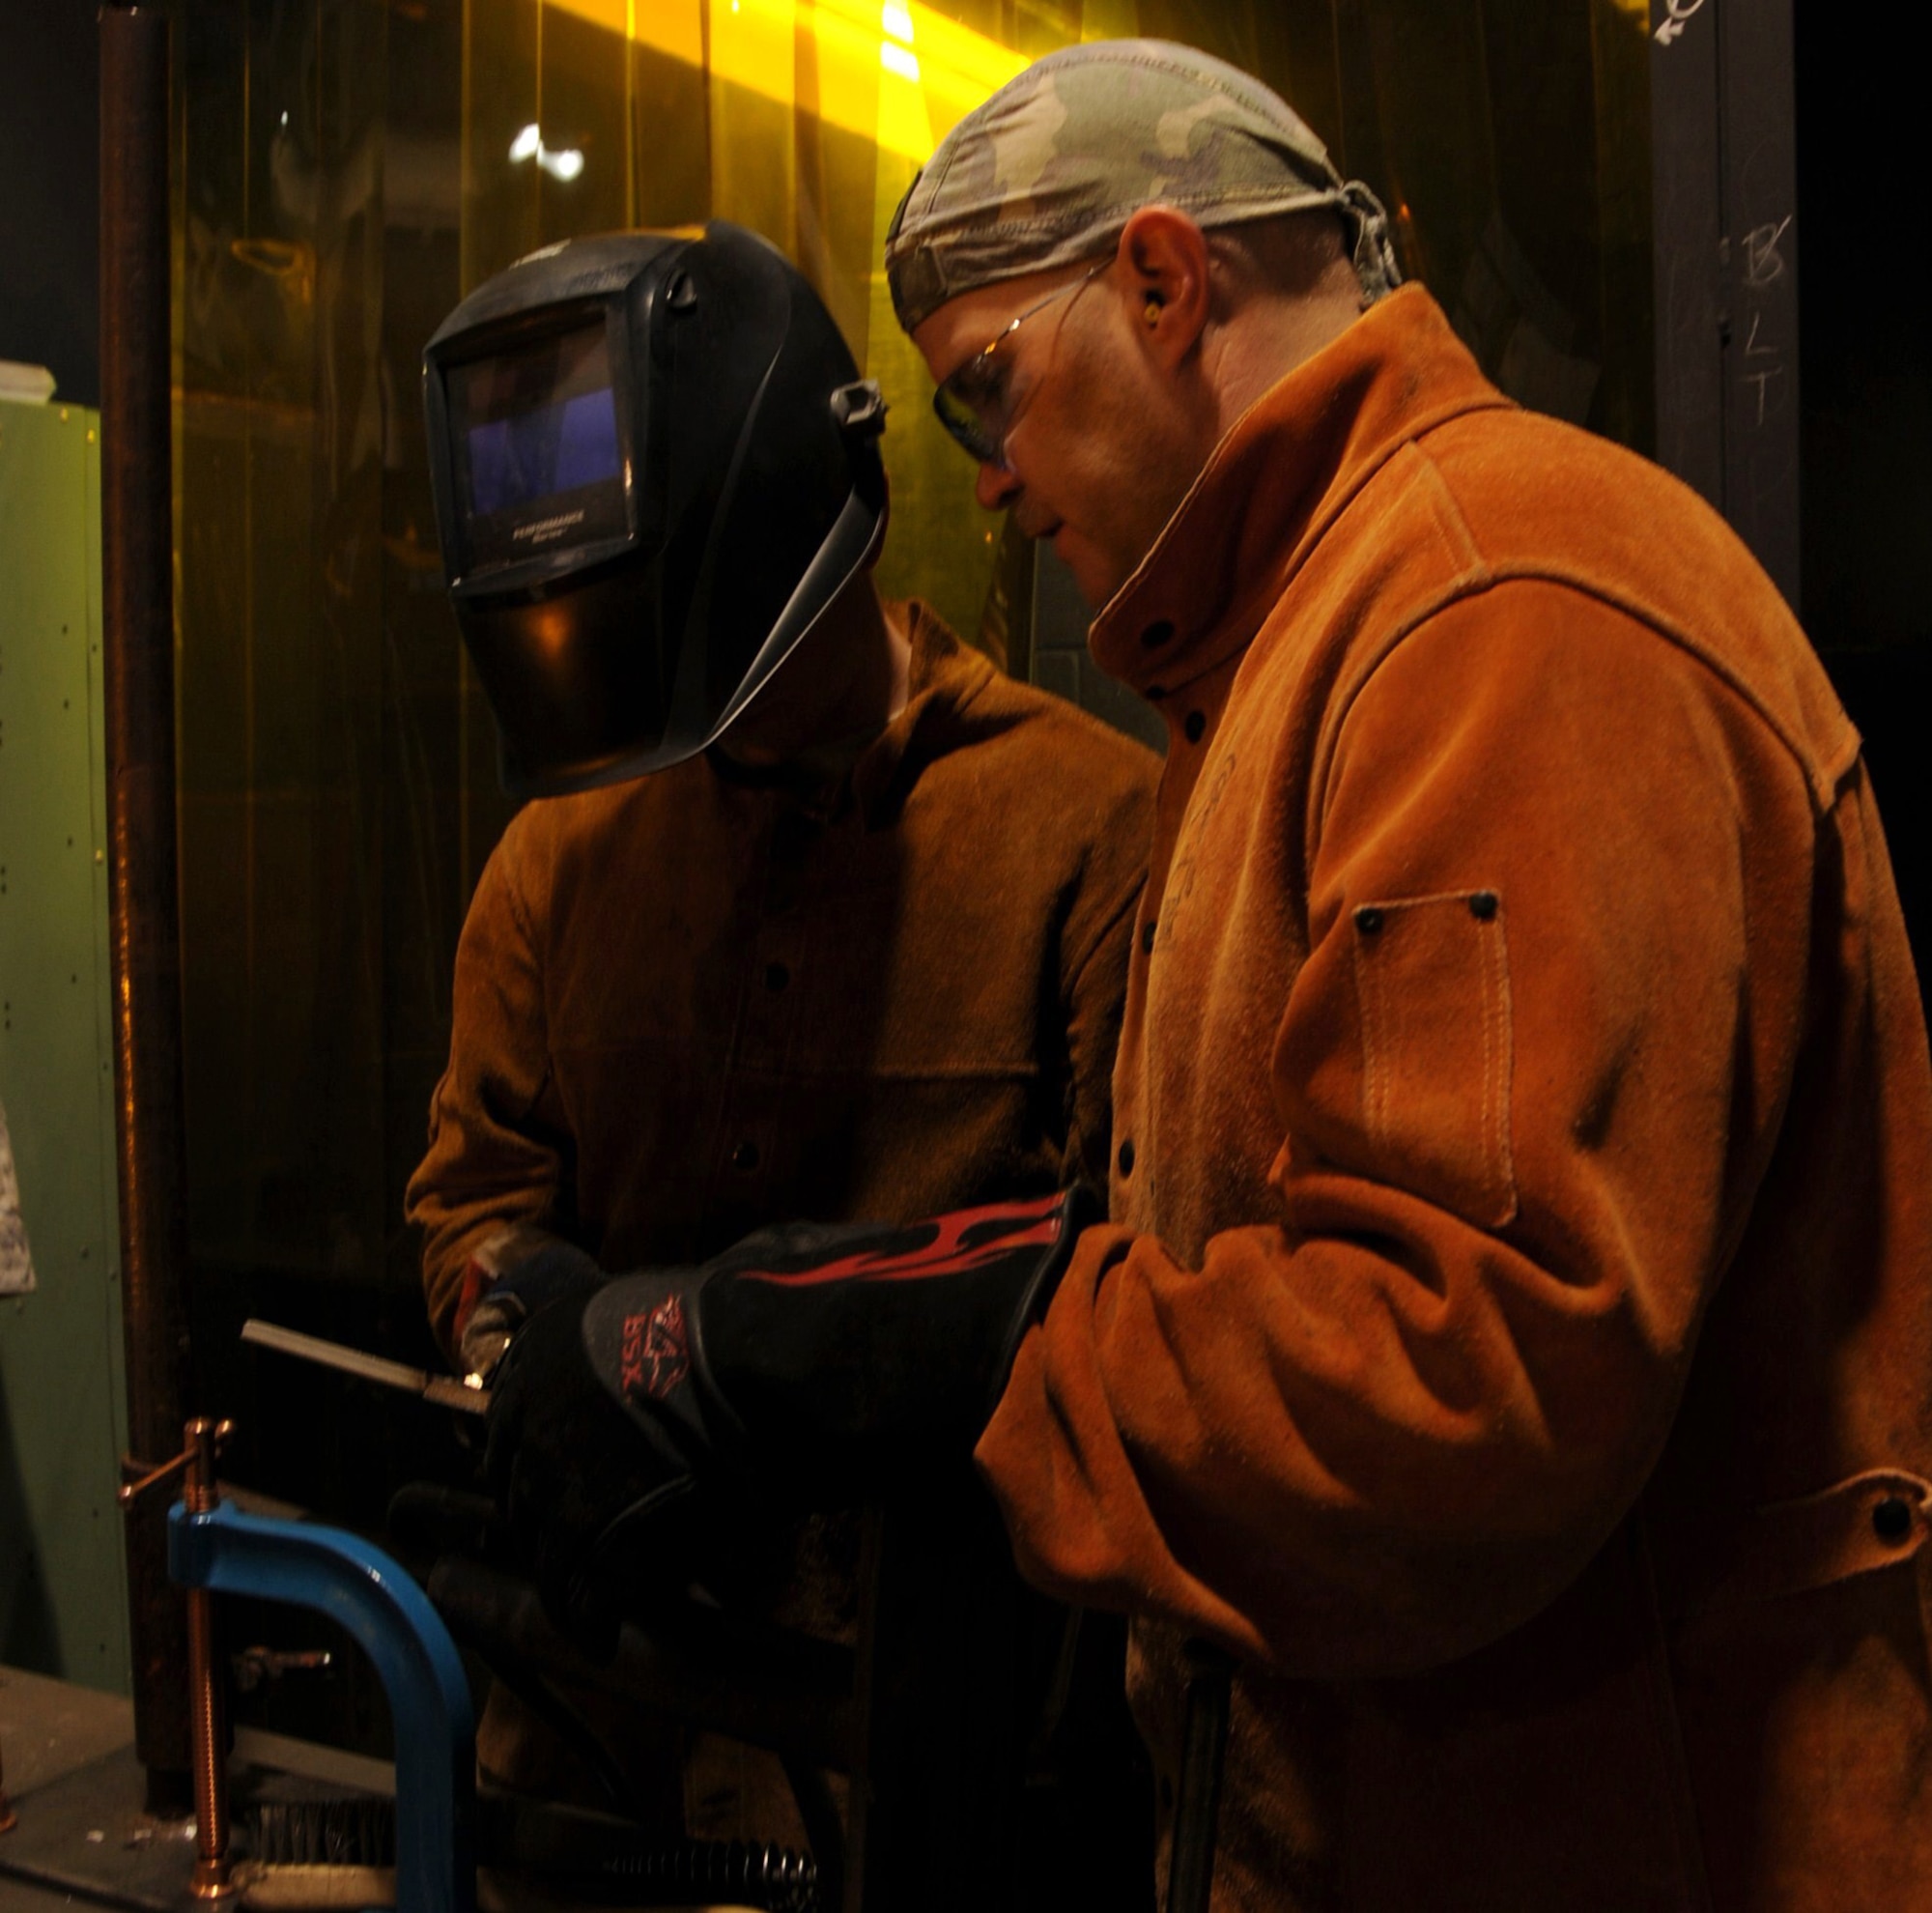 Sergeant Human evaluates a student’s completed weld. He checks to make sure the bead has gone through pieces of metal completely and that the weld was completed in no more than three passes. (Photo by Airman 1st Class Heather Holcomb)